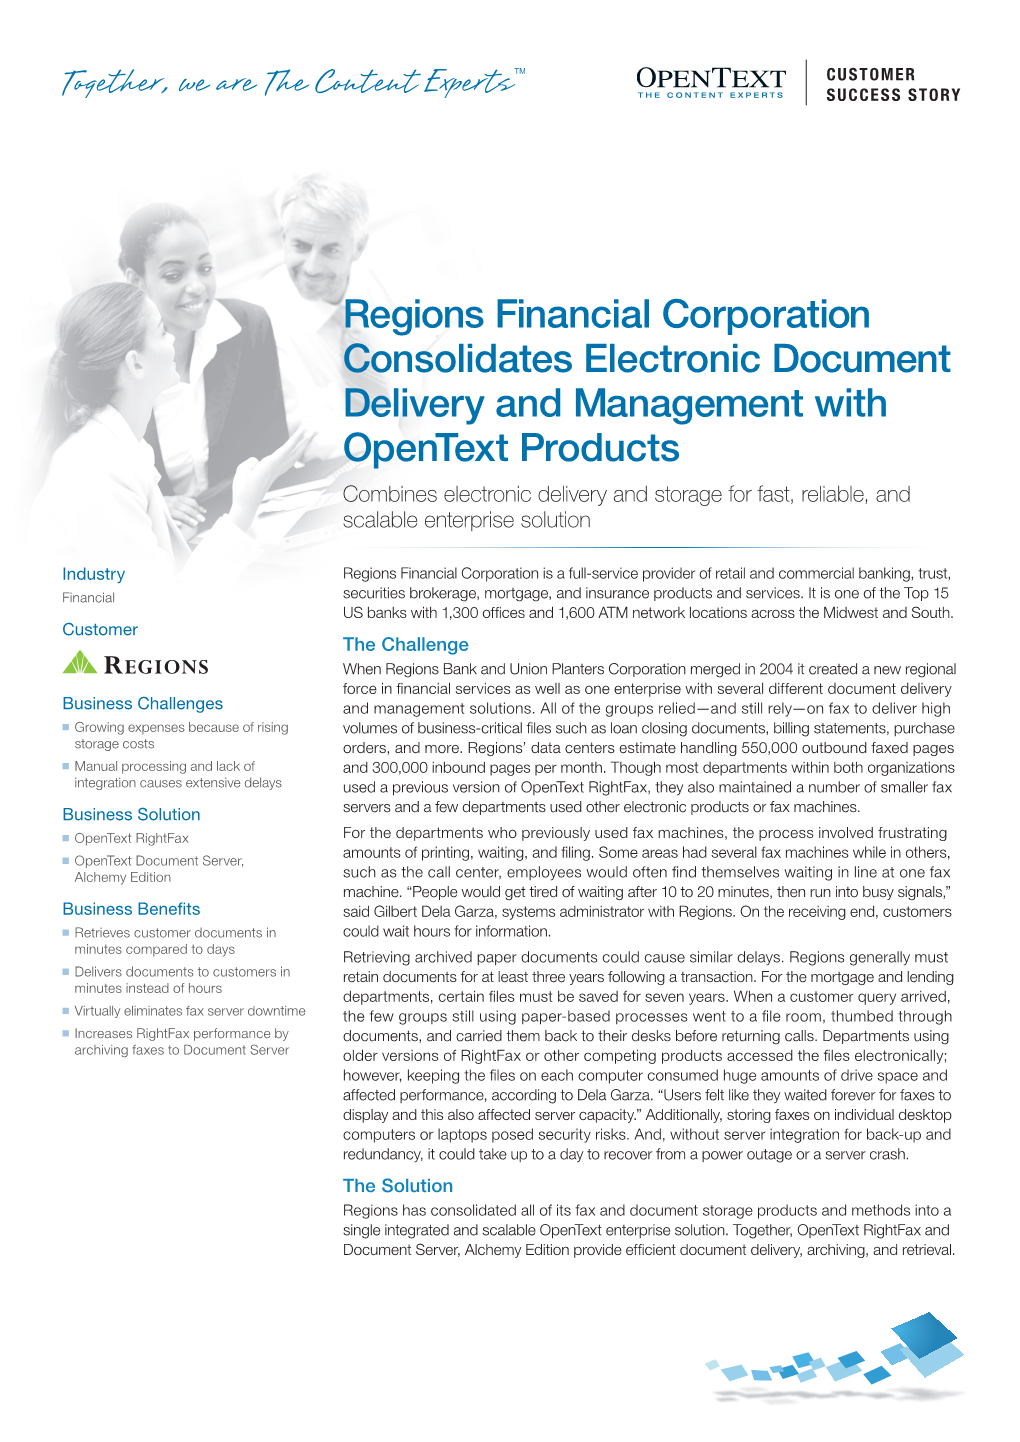 Regions Financial Corporation Consolidates Electronic Document